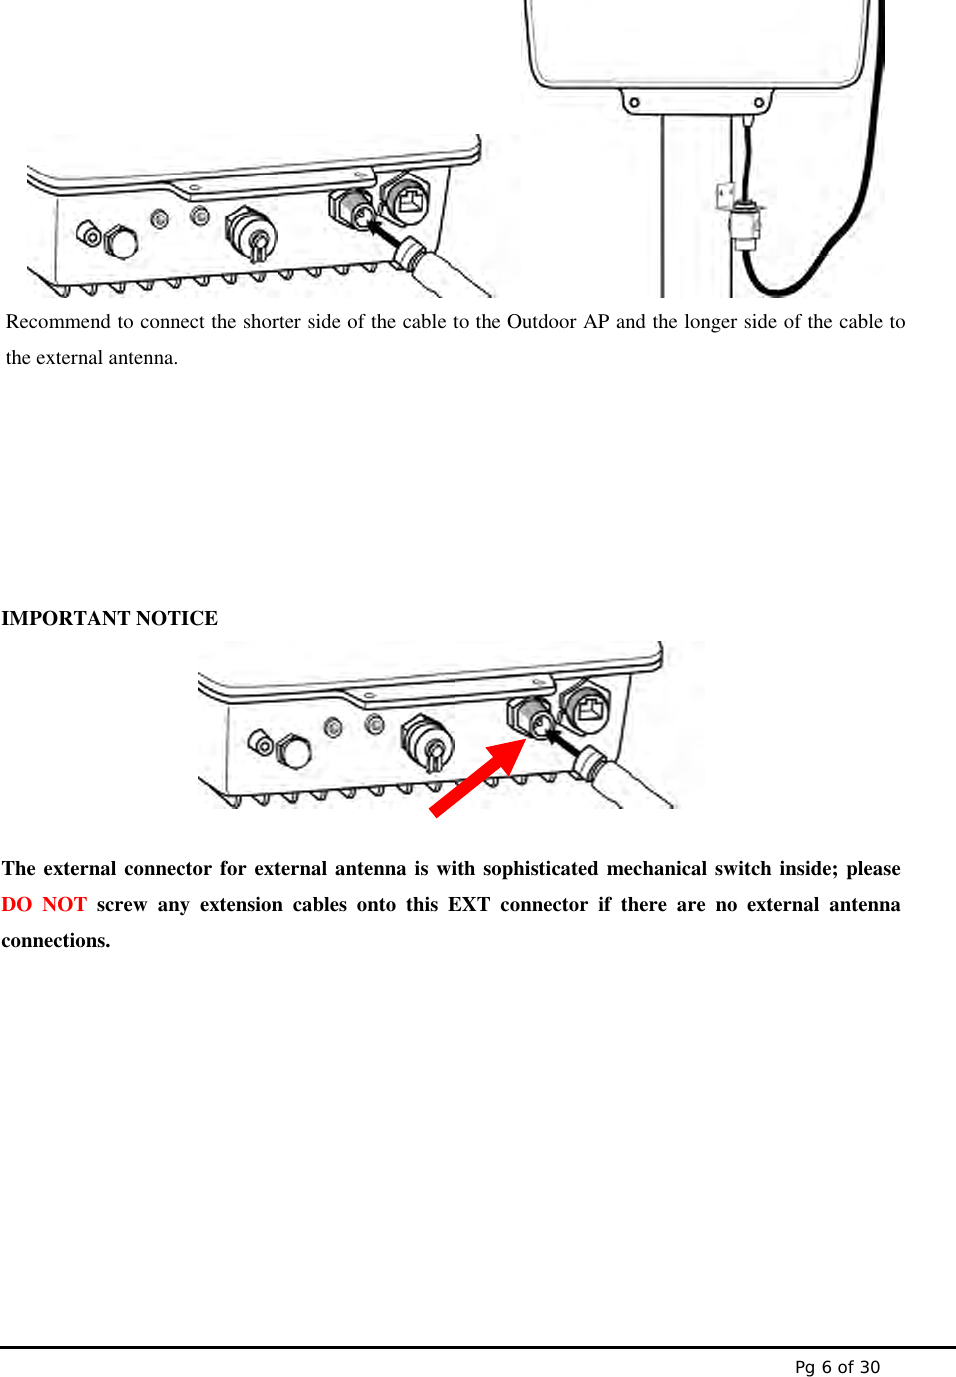 Pg 6 of 30IMPORTANT NOTICEThe external connector for external antenna is with sophisticated mechanical switch inside; pleaseDO NOT screw any extension cables onto this EXT connector if there are no external antennaconnections.Recommend to connect the shorter side of the cable to the Outdoor AP and the longer side of the cable tothe external antenna.